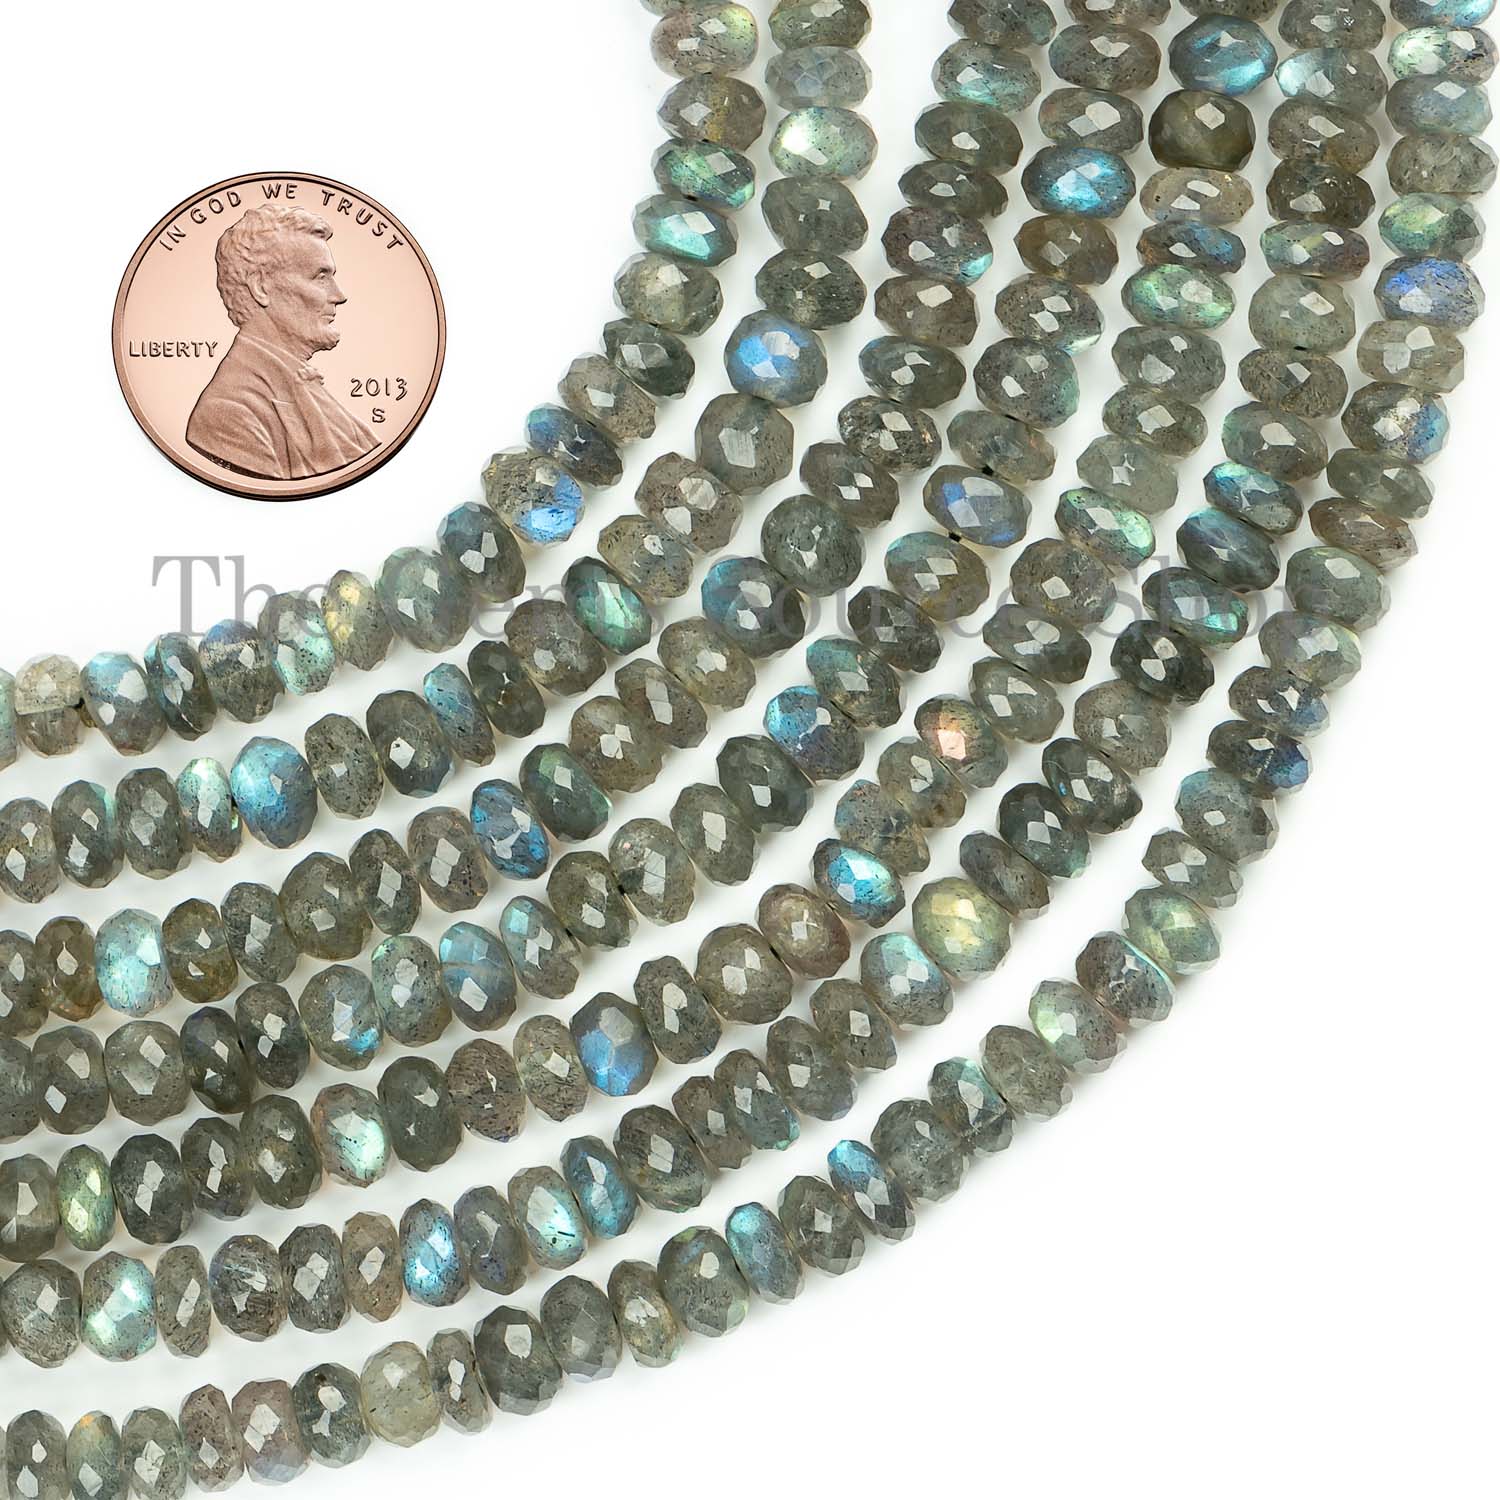 6.5 mm Labradorite Faceted Rondelle Beads, Labradorite Briolette Beads, Loose Labradorite Strand